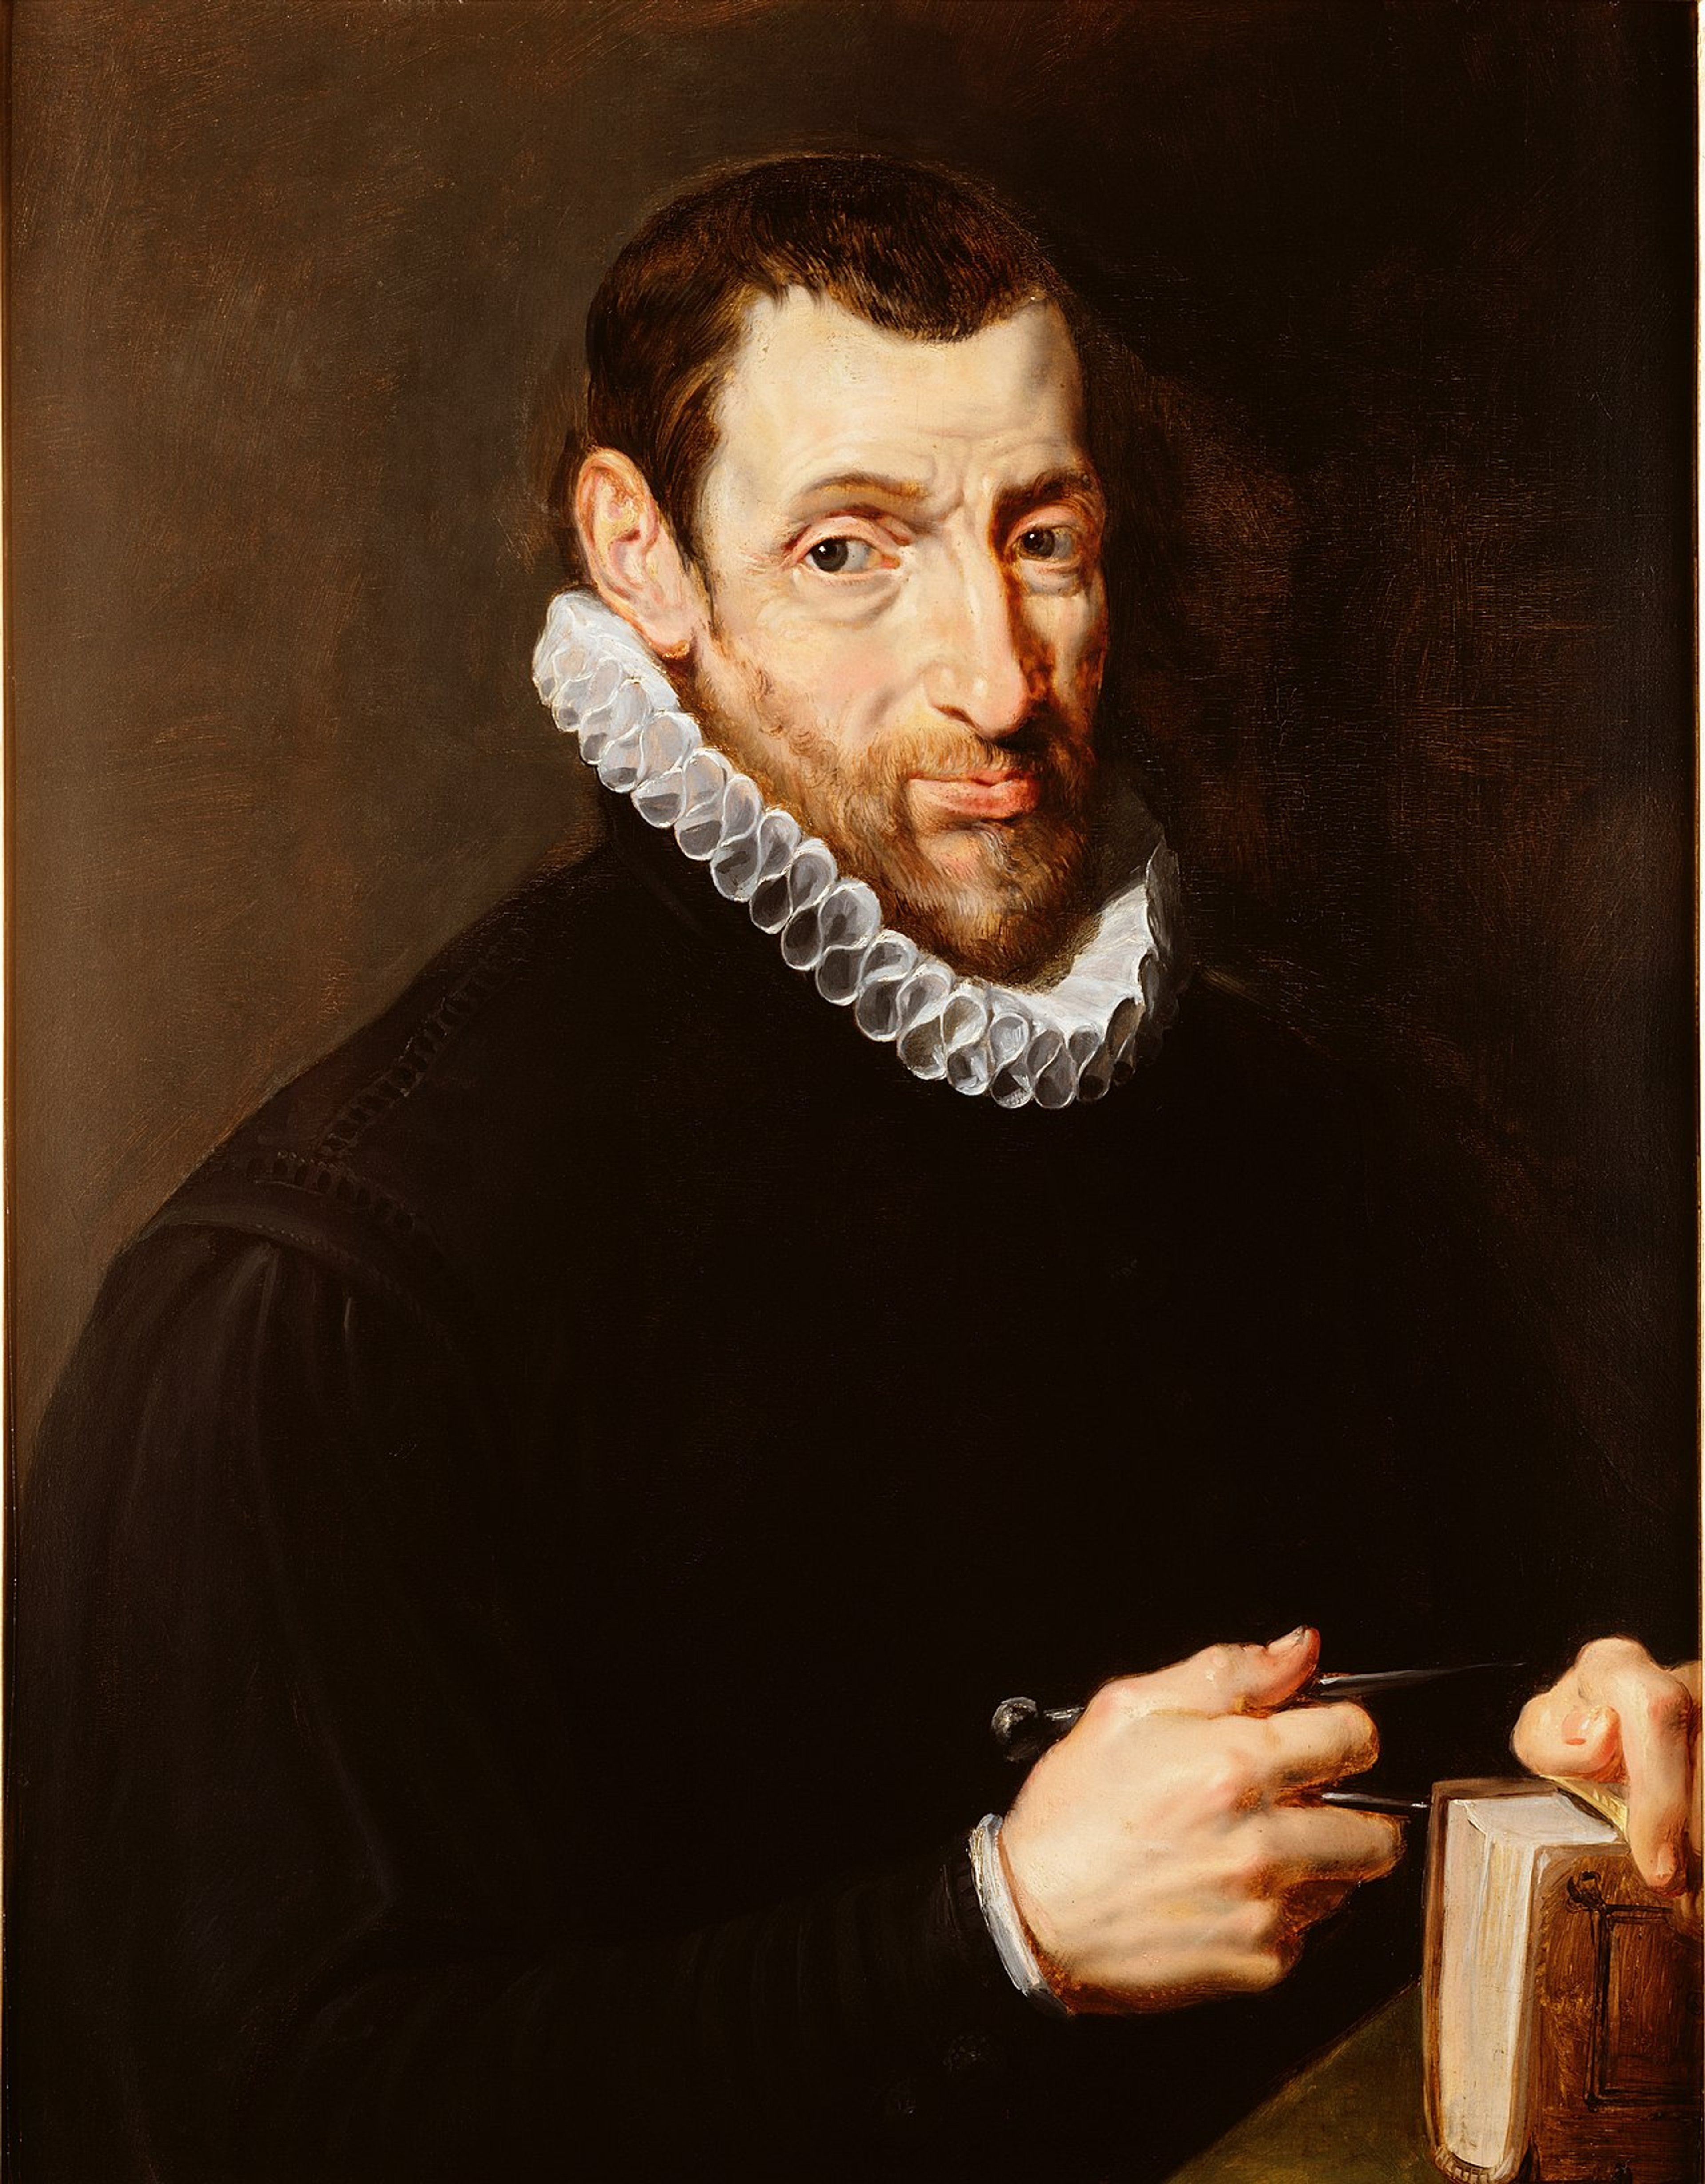 Painted portrait of Christopher Plantin, a man with short brown hair, holding a compass in his right hand and a book in his left hand.